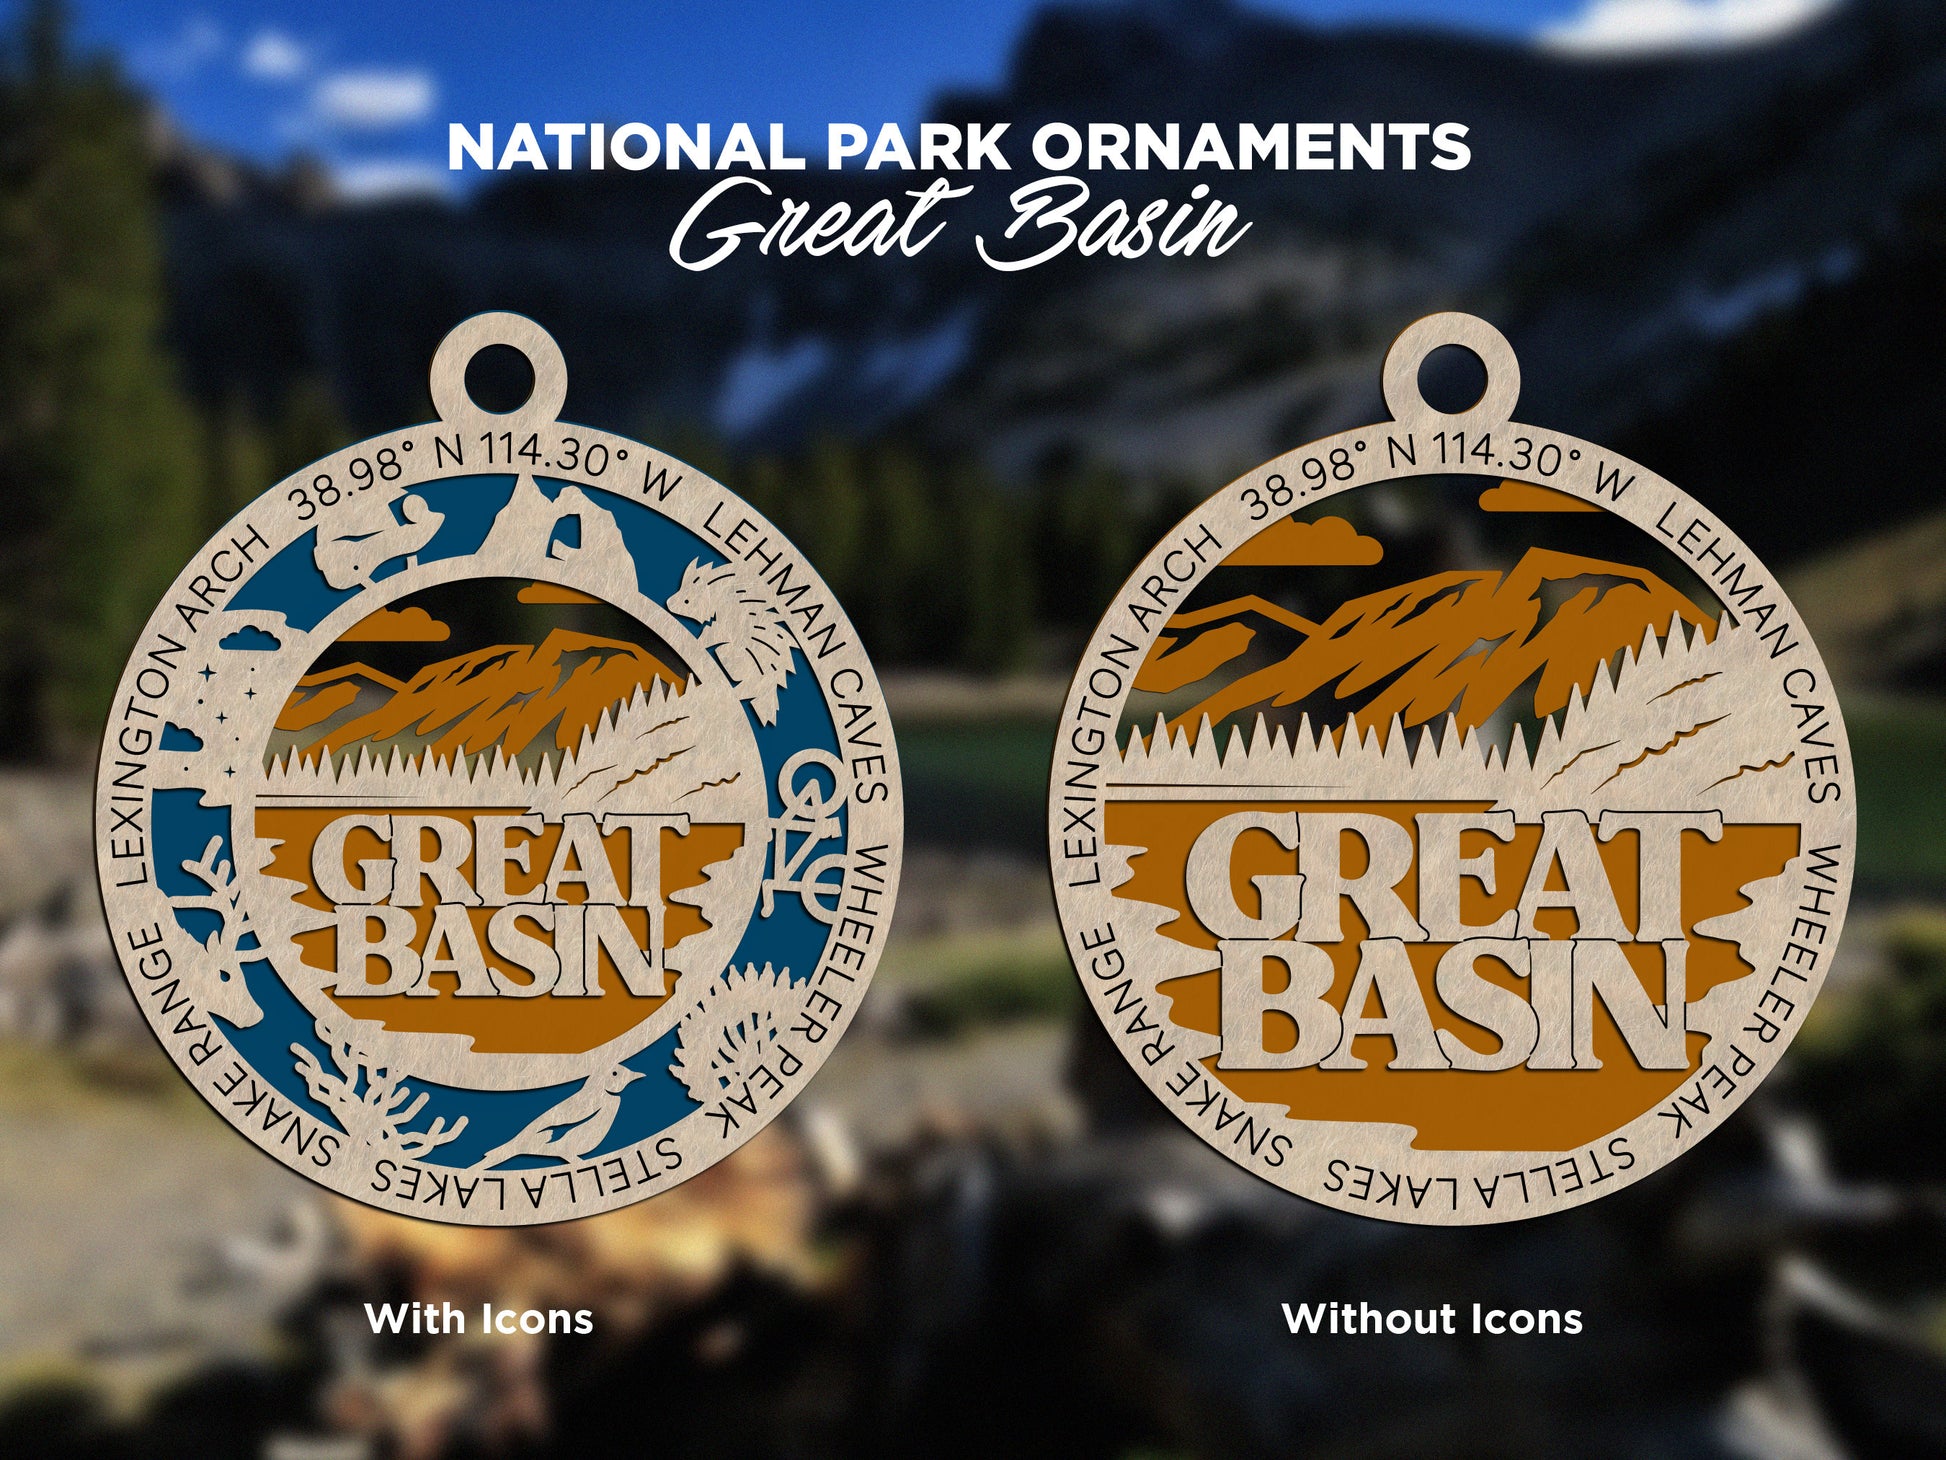 Great Basin Park Ornament - Includes 2 Ornaments - Laser Design SVG, PDF, AI File Download - Tested On Glowforge and LightBurn